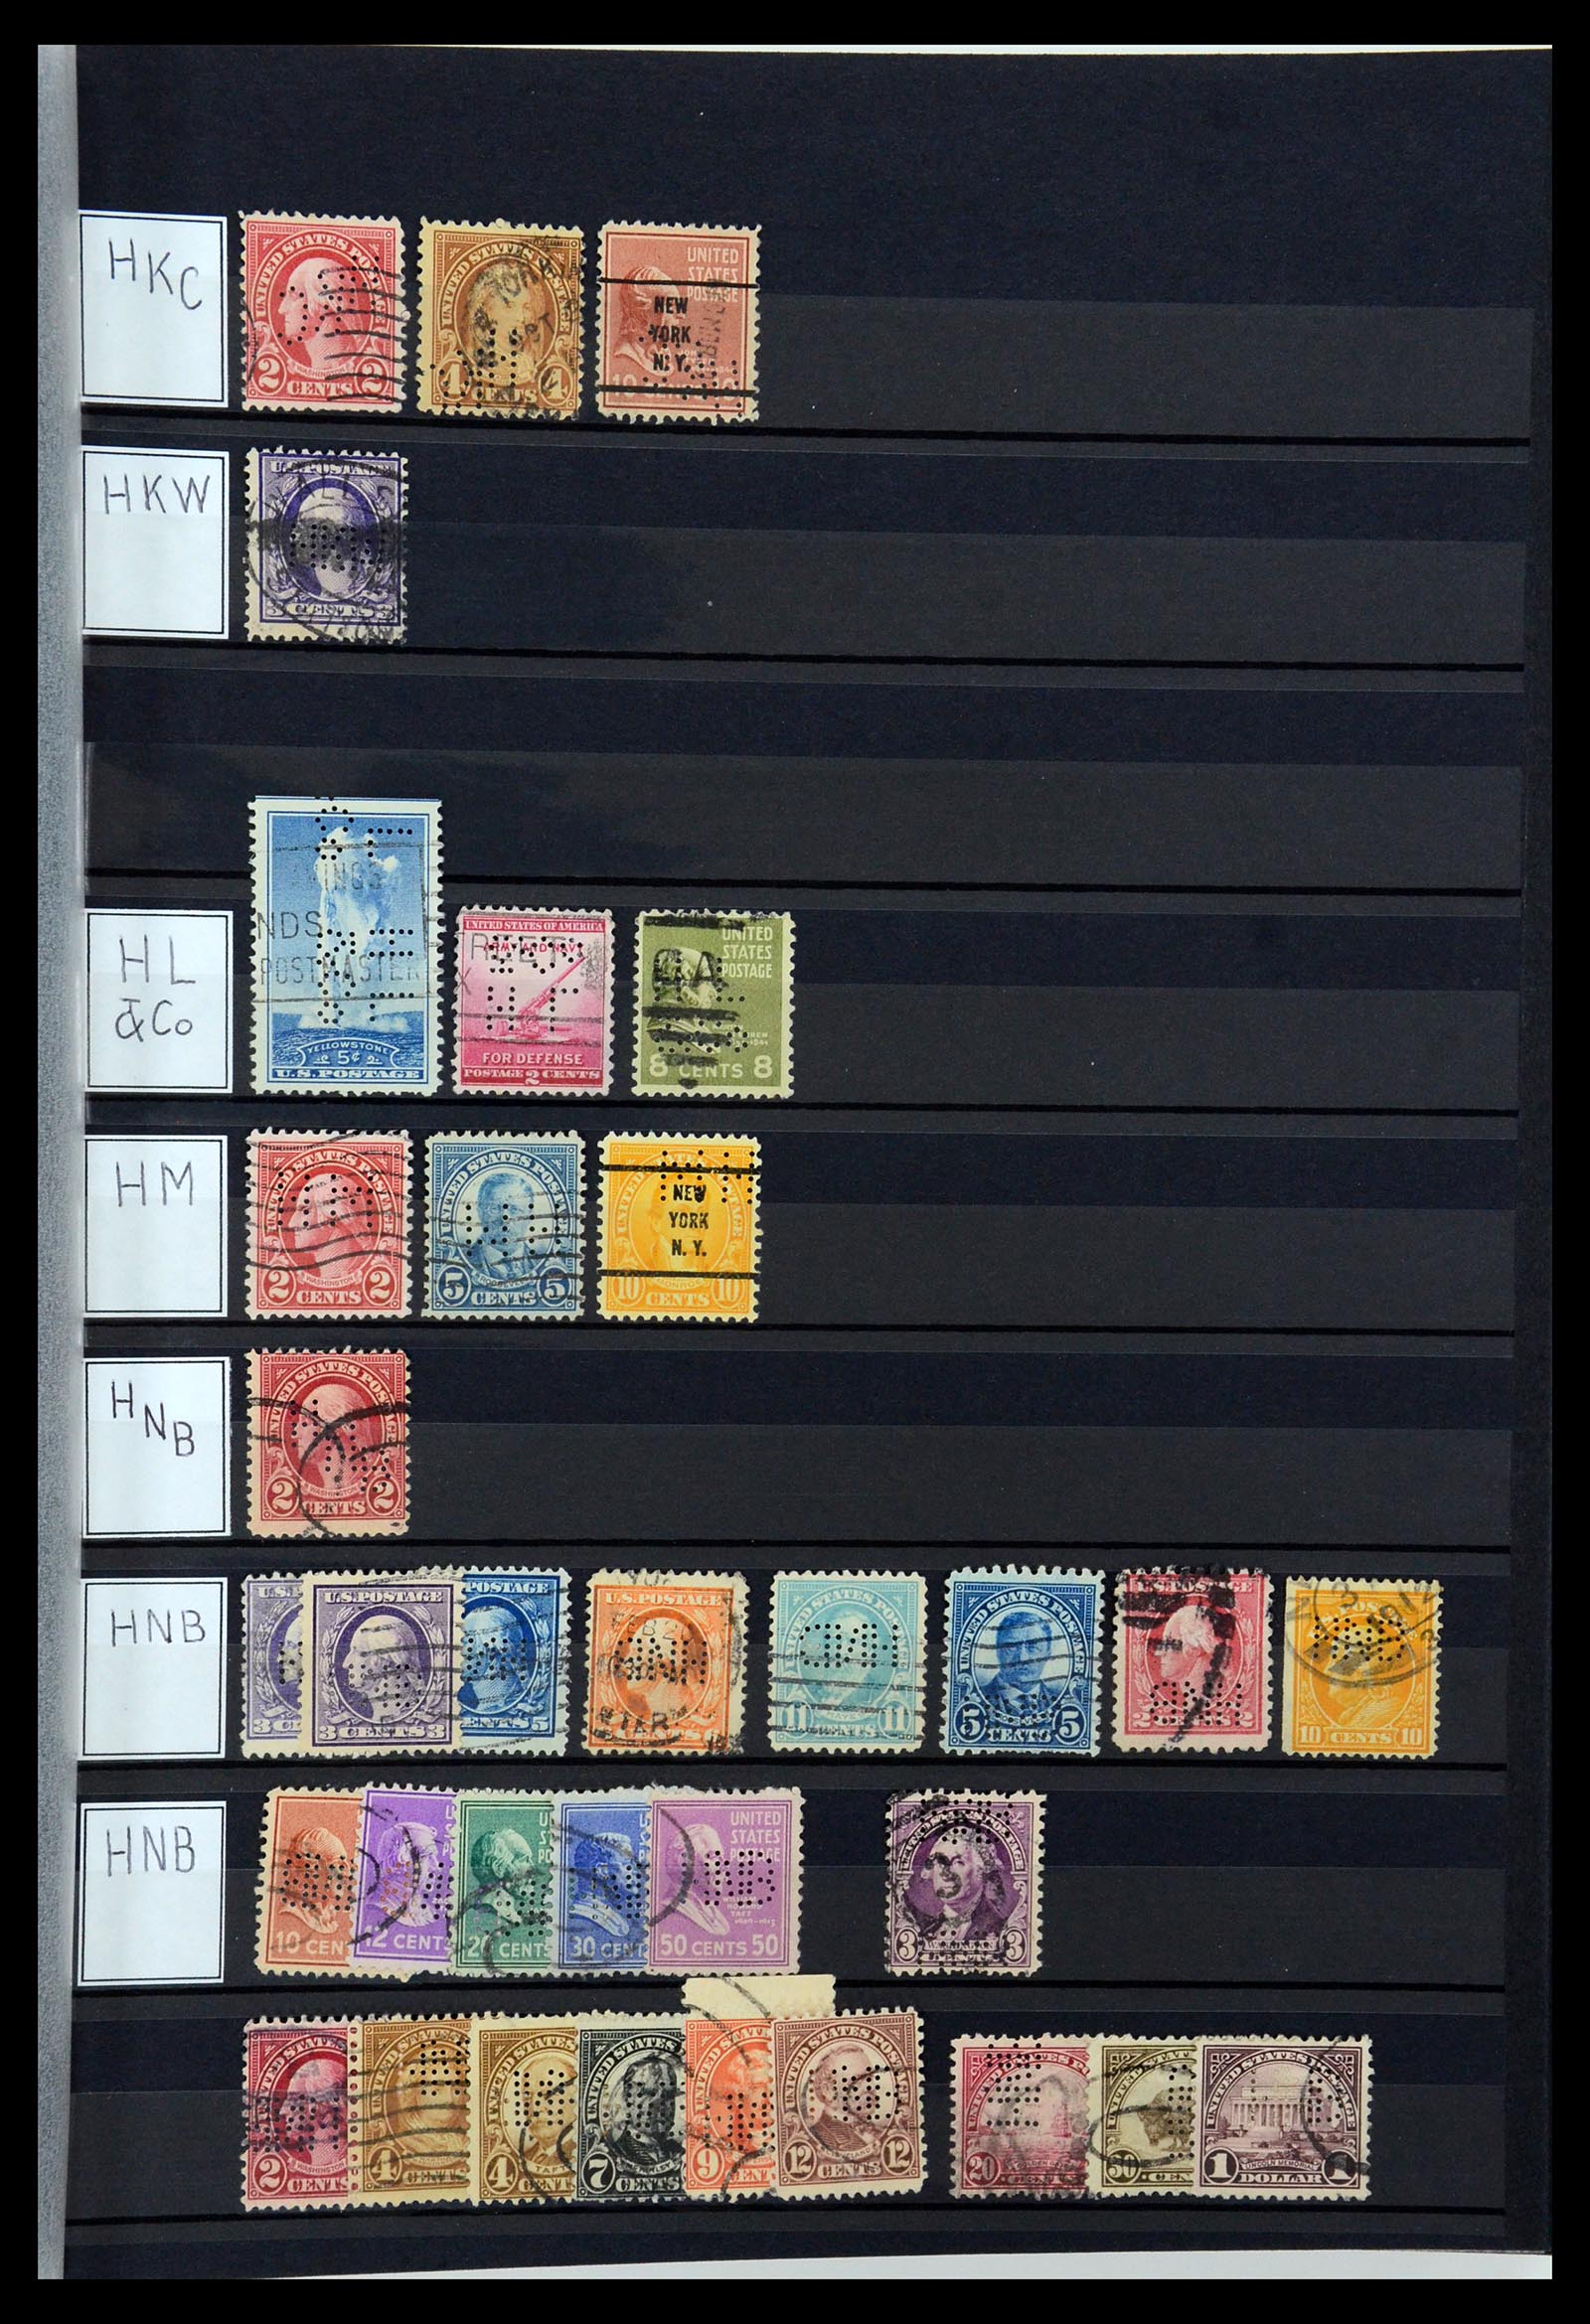 36388 063 - Stamp collection 36388 USA perfins.